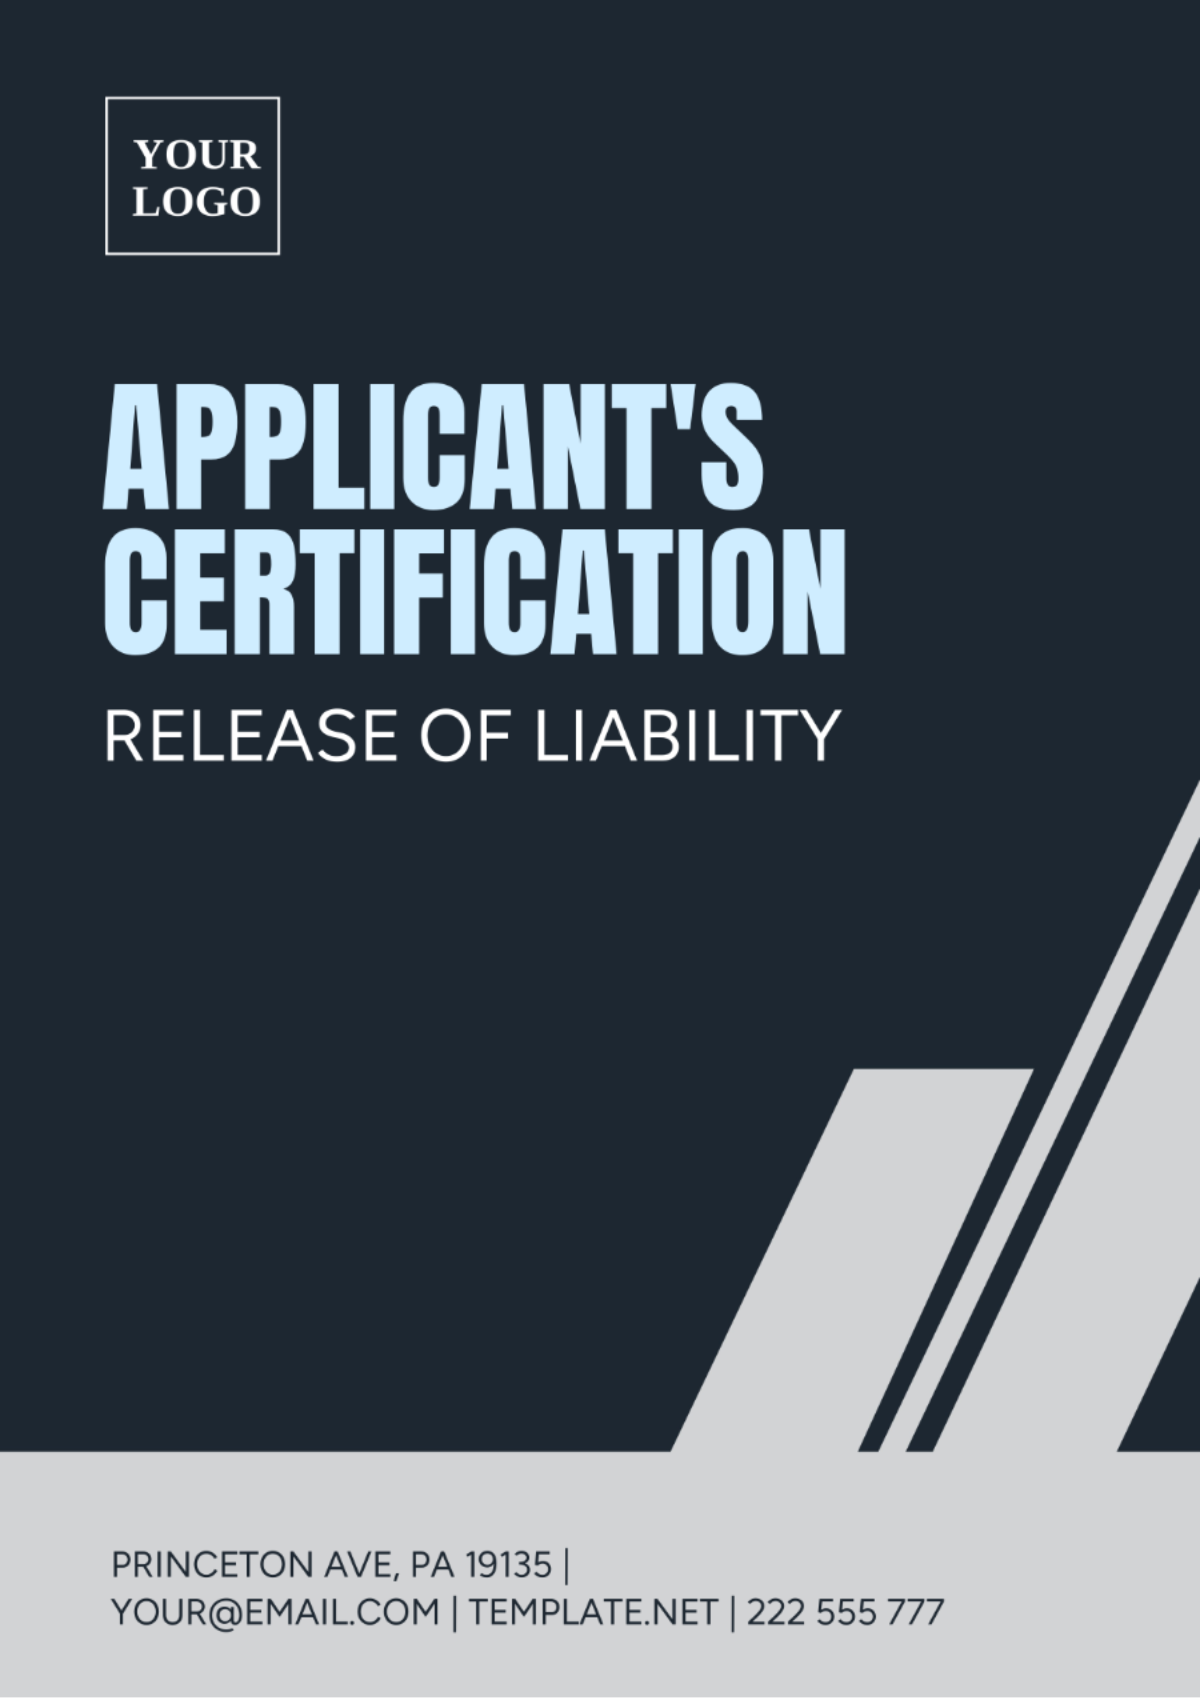 Applicants Certification Release of Liability Template